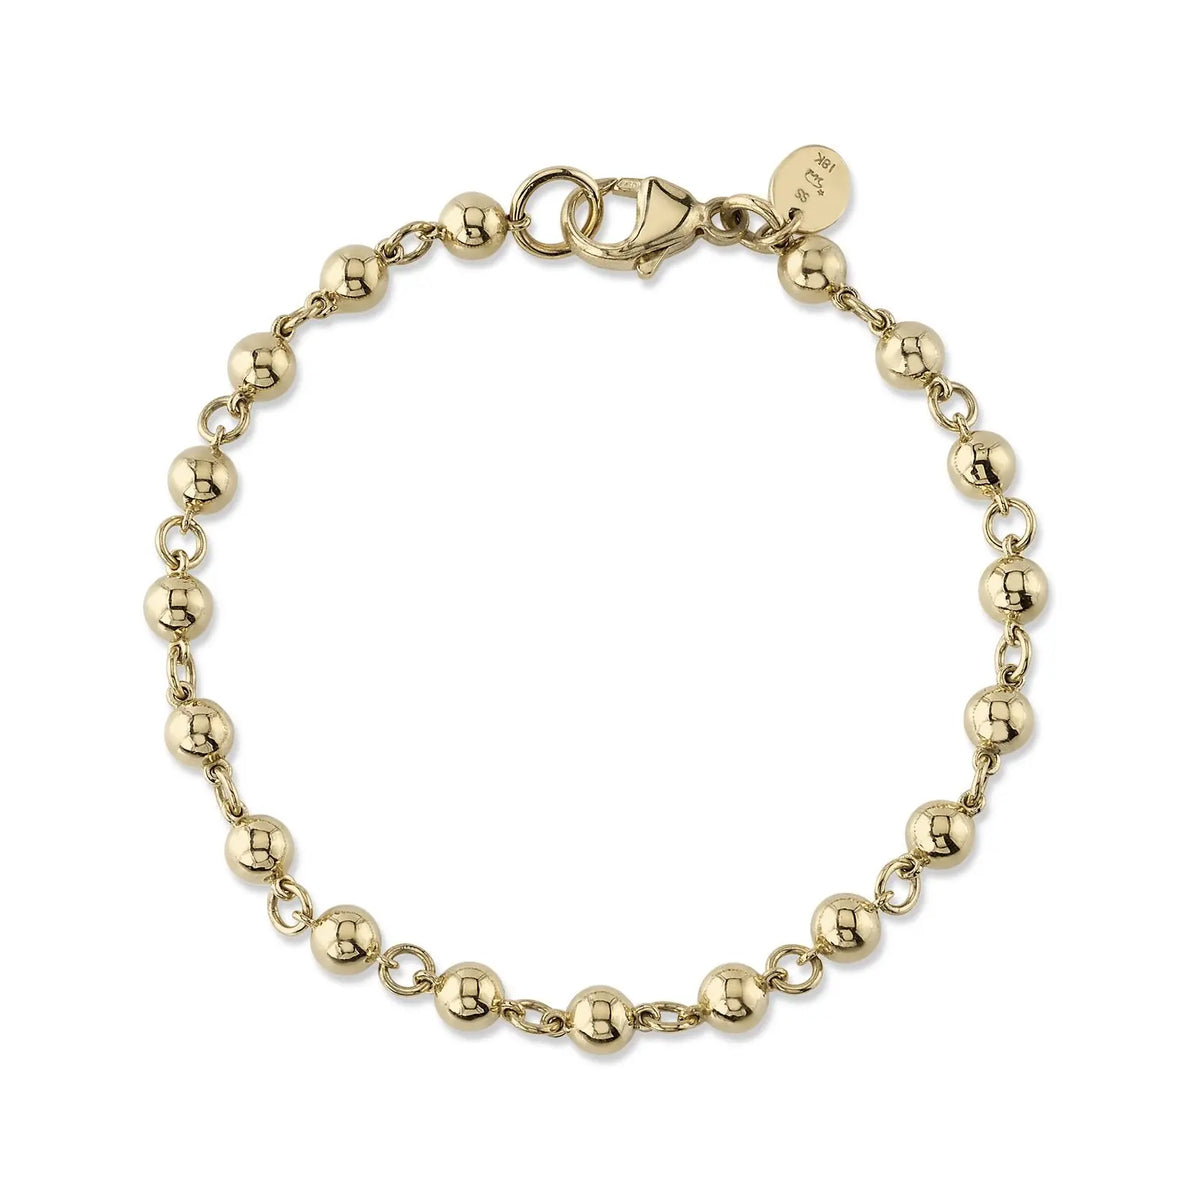 Handcrafted 18K yellow gold large rosary bead bracelet. Beads measure 5mm in diameter.  Bracelet measures 7.5&quot;  If an item is out of stock, please allow 6-8 weeks for delivery.  Designed by Single Stone and made in LA